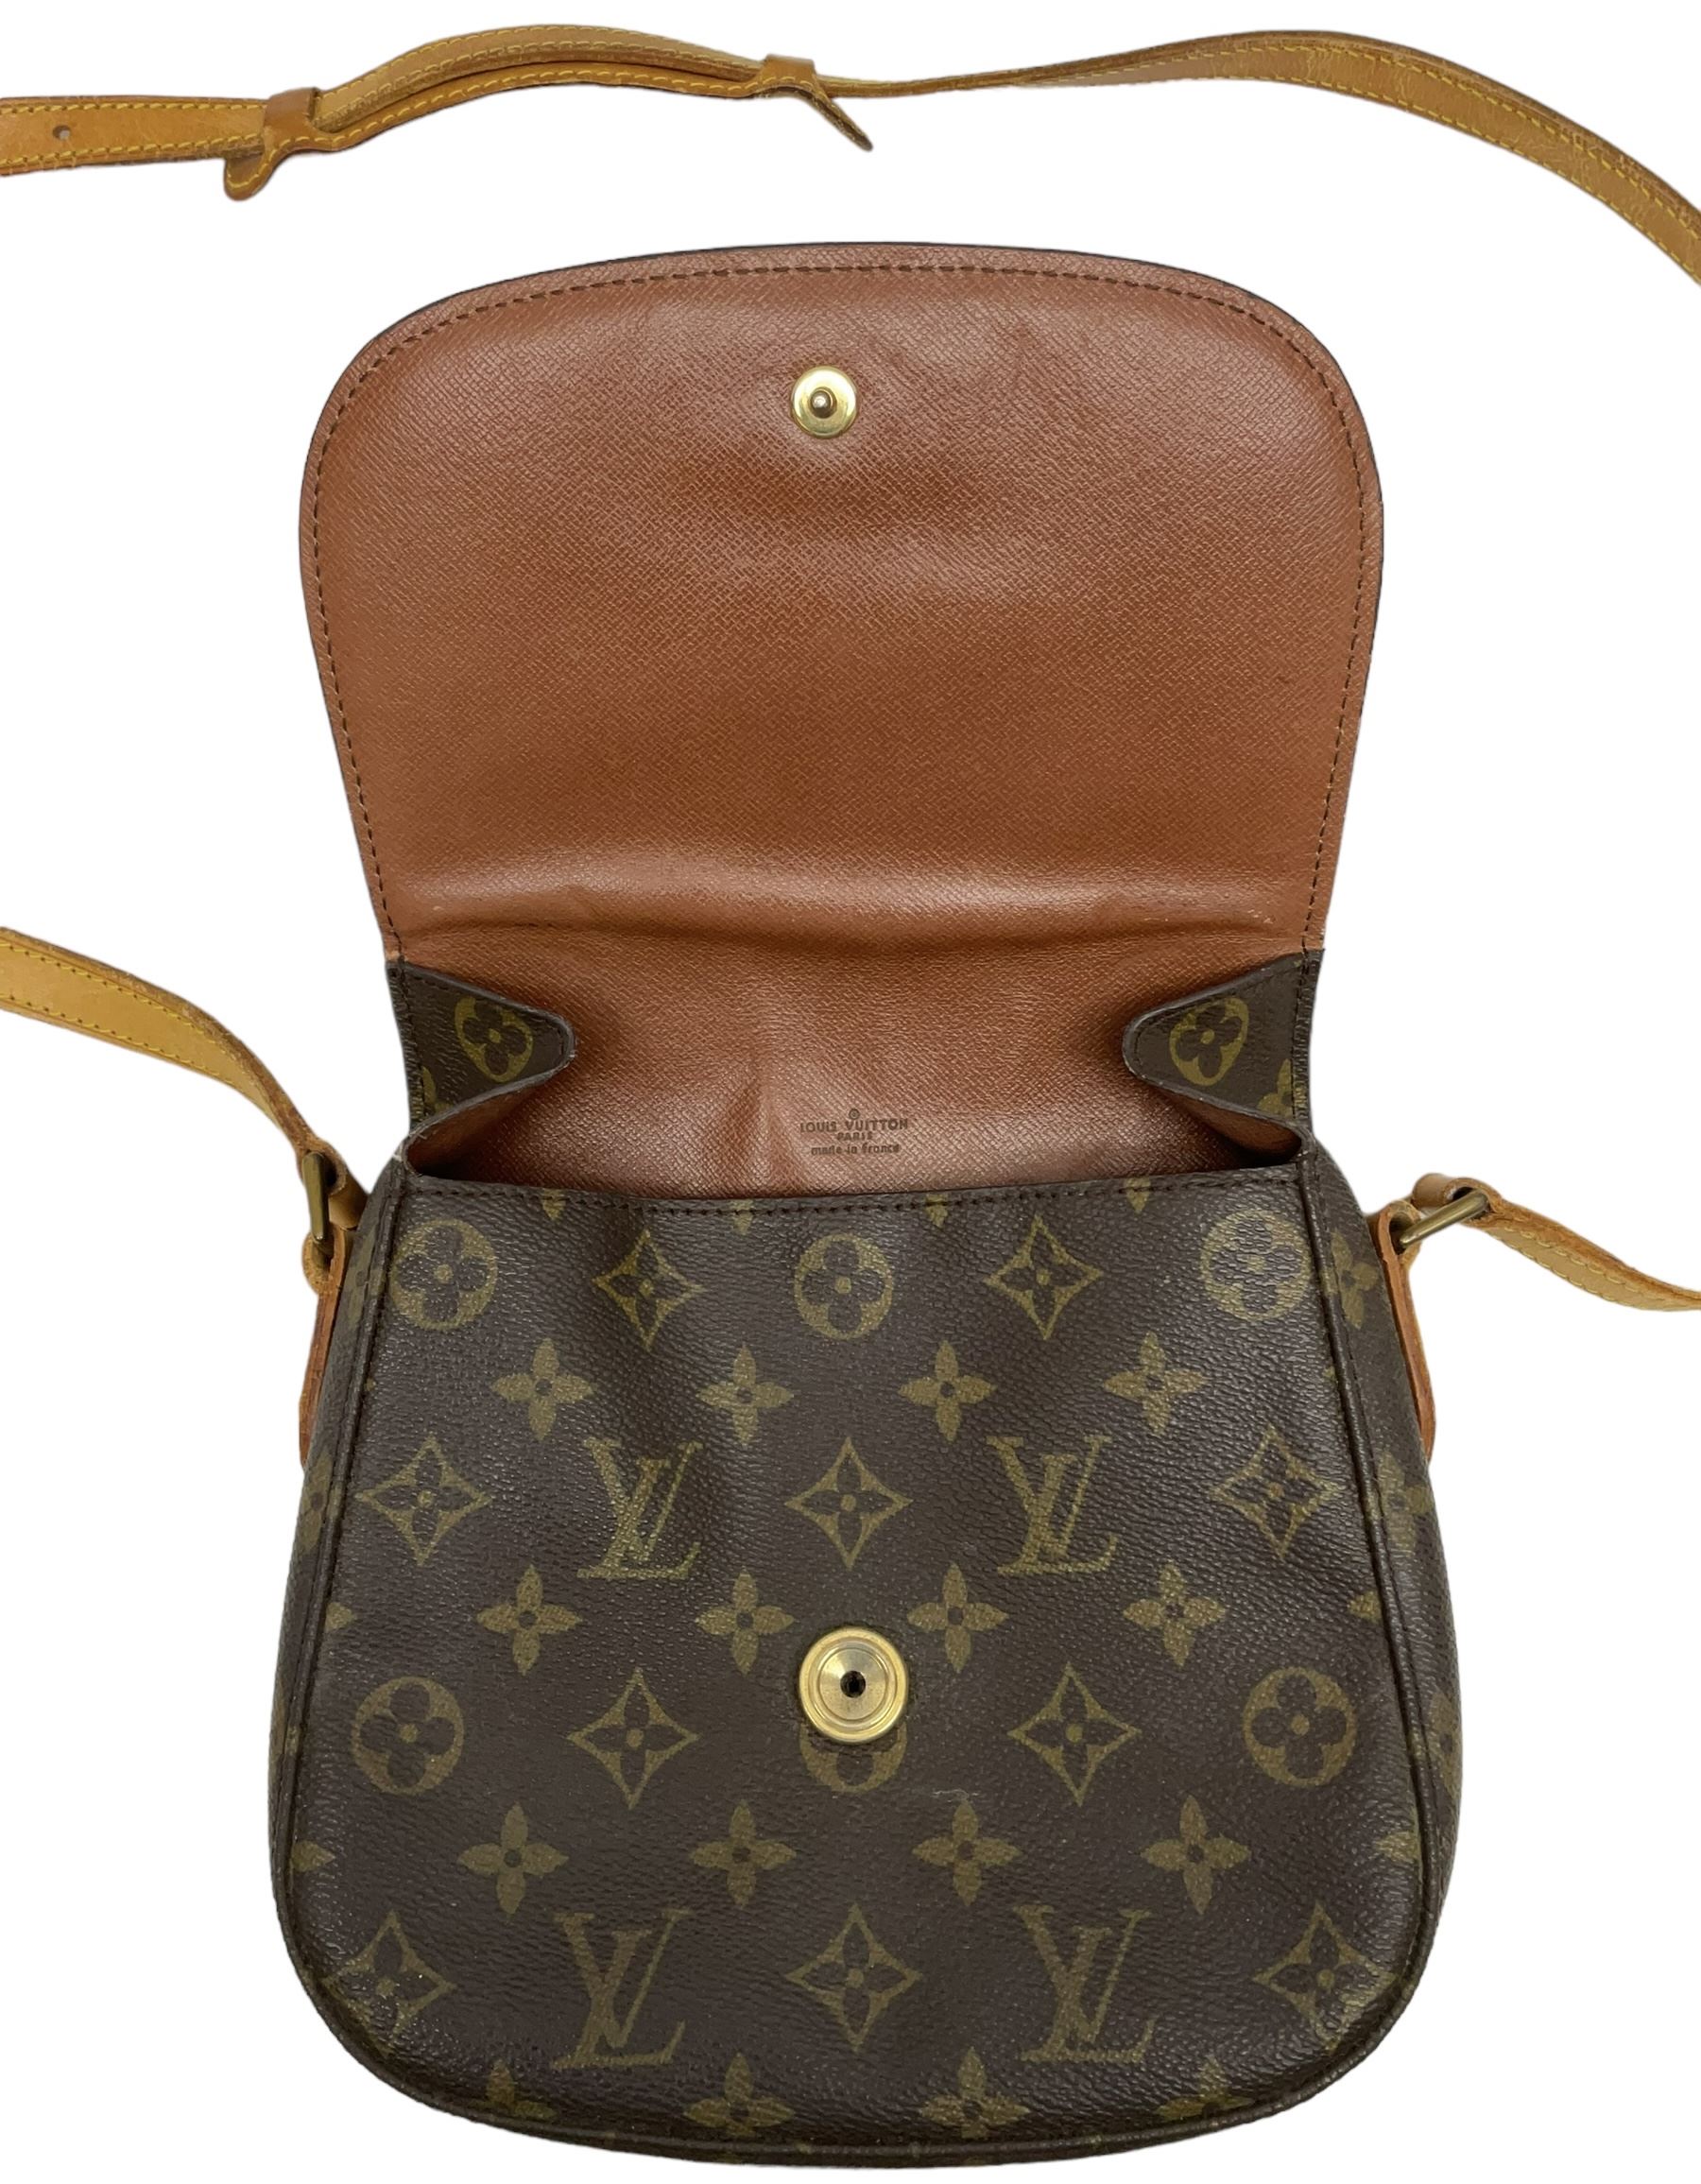 Louis Vuitton Saint Cloud cross body monogram bag with vachetta leather strap and snap closure to th - Image 4 of 11